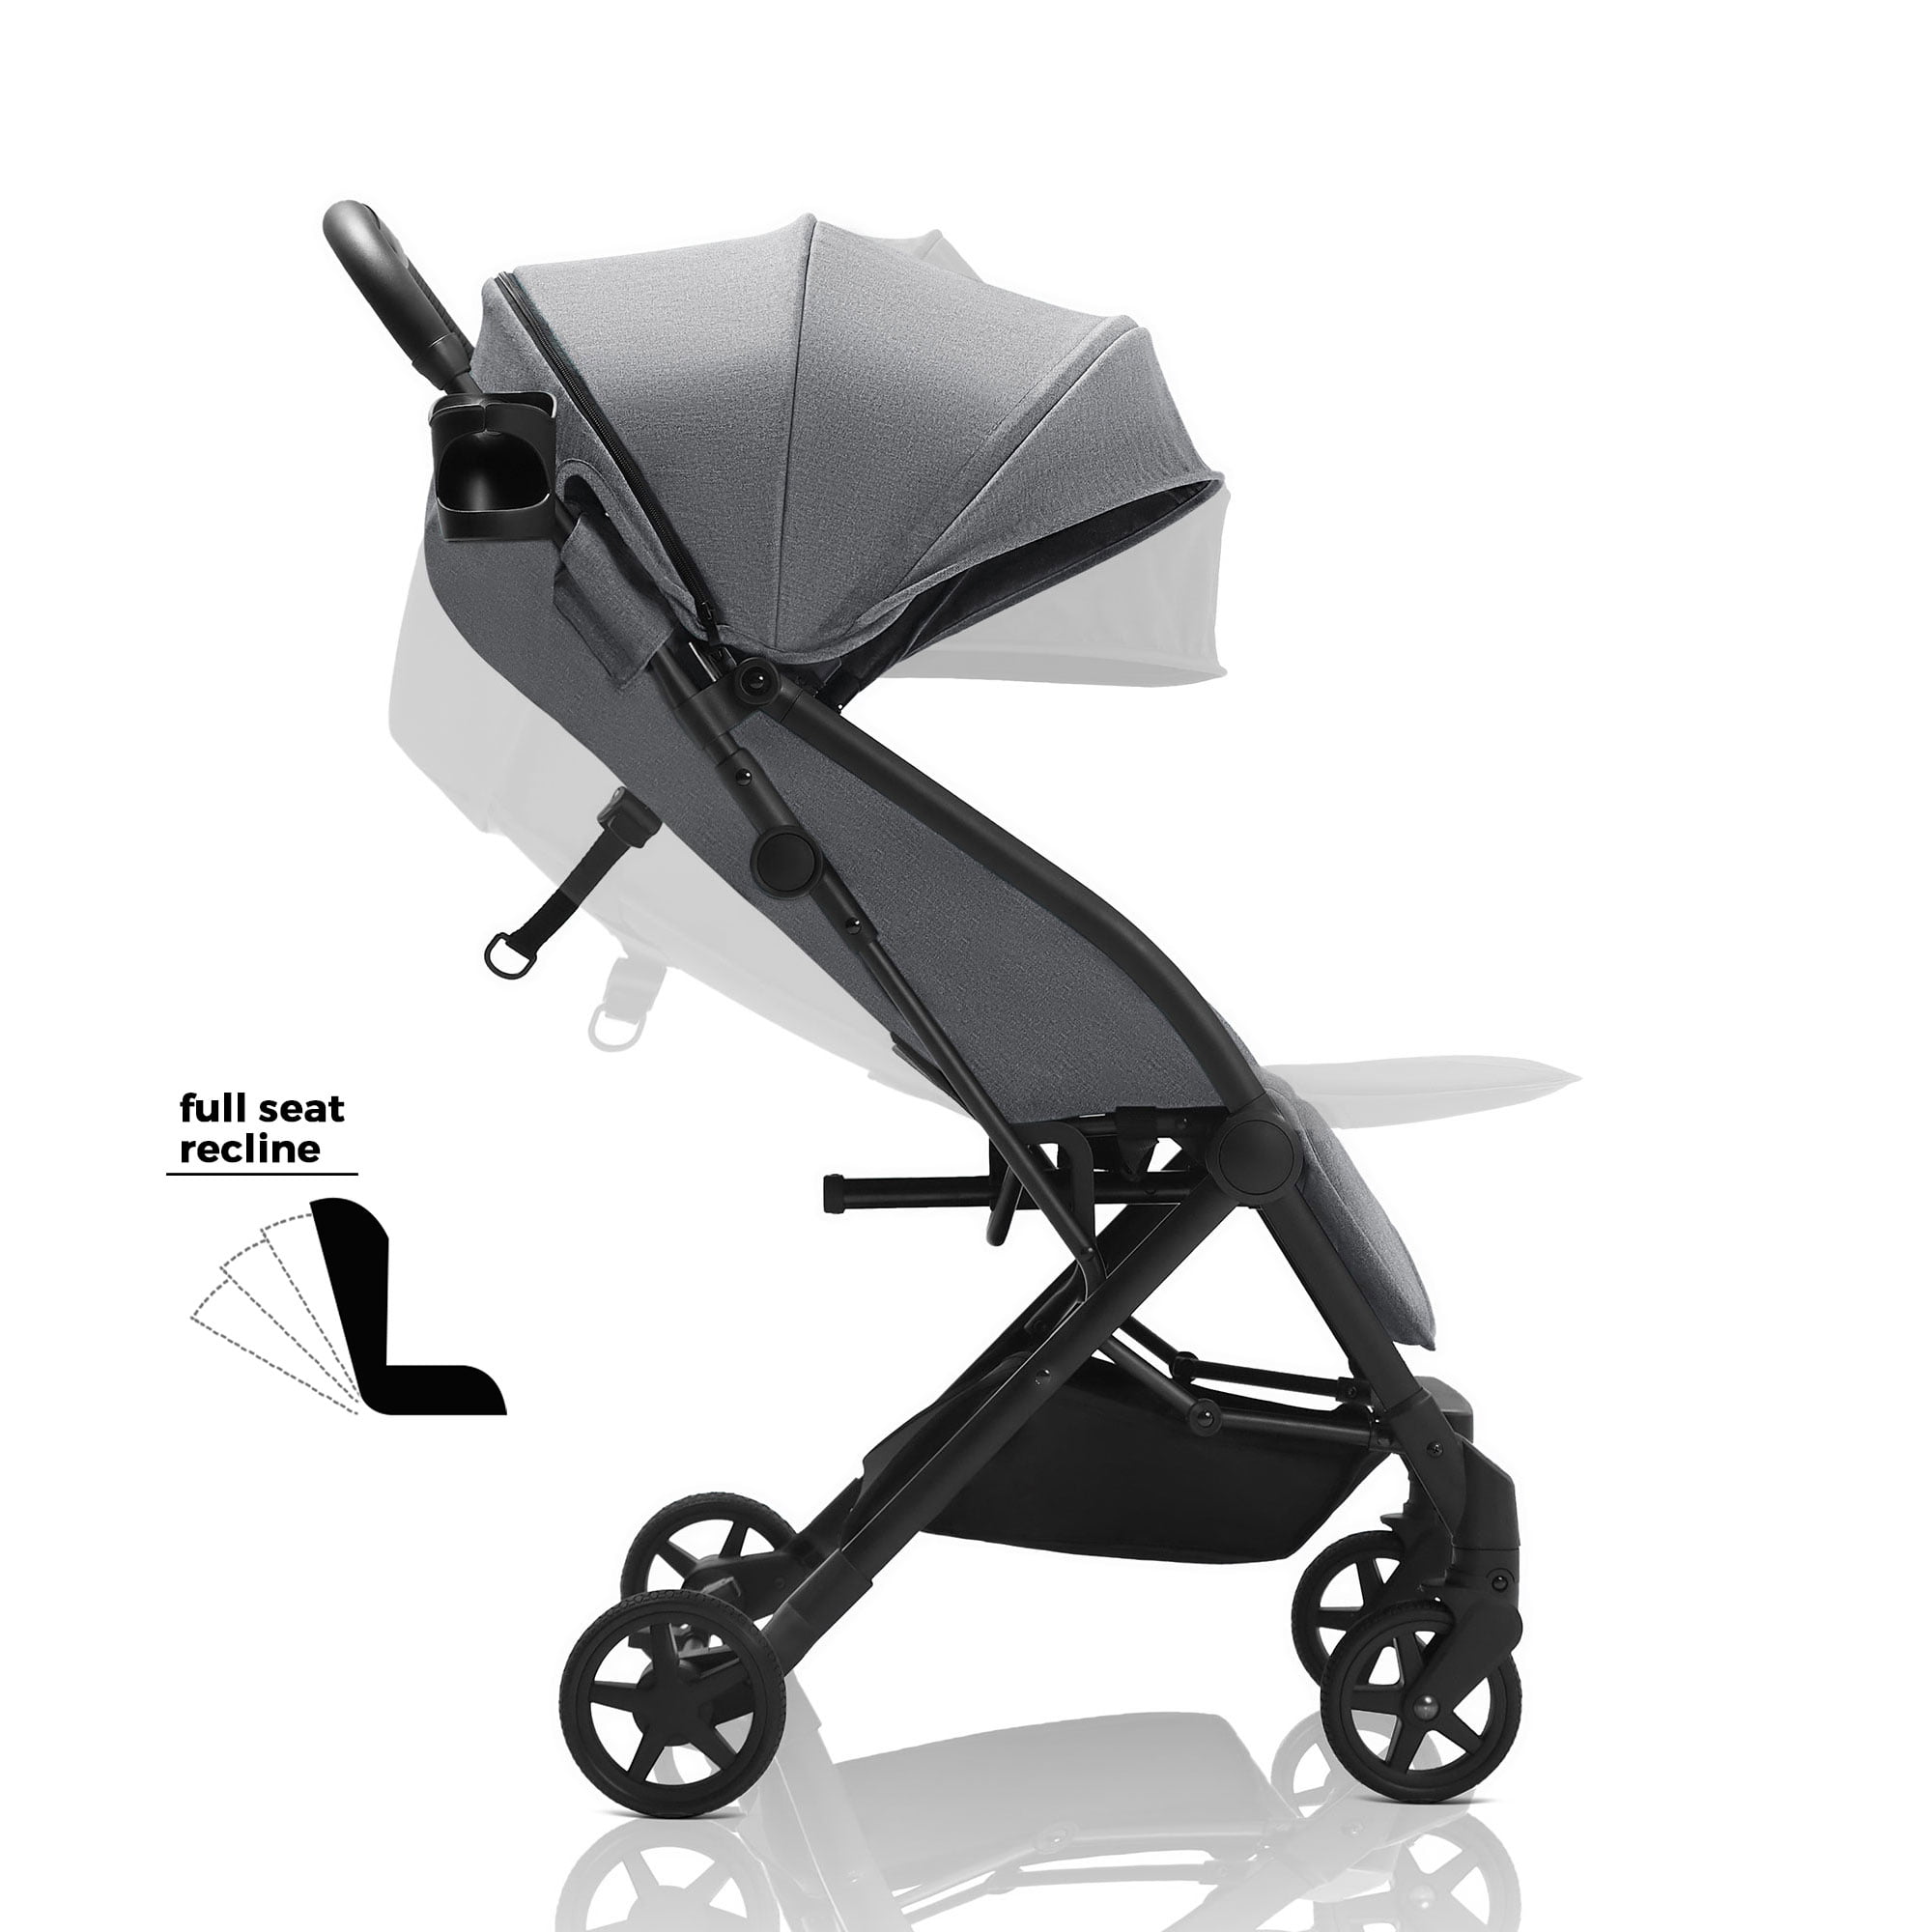 Lightweight Stroller Compact One-Hand Fold Luggage-Style Travel Stroller for Airplane Friendly Mompush Lithe with Rain Cover & Travel Carry Bag & Cup Holder Reclining Seat and XL Canopy